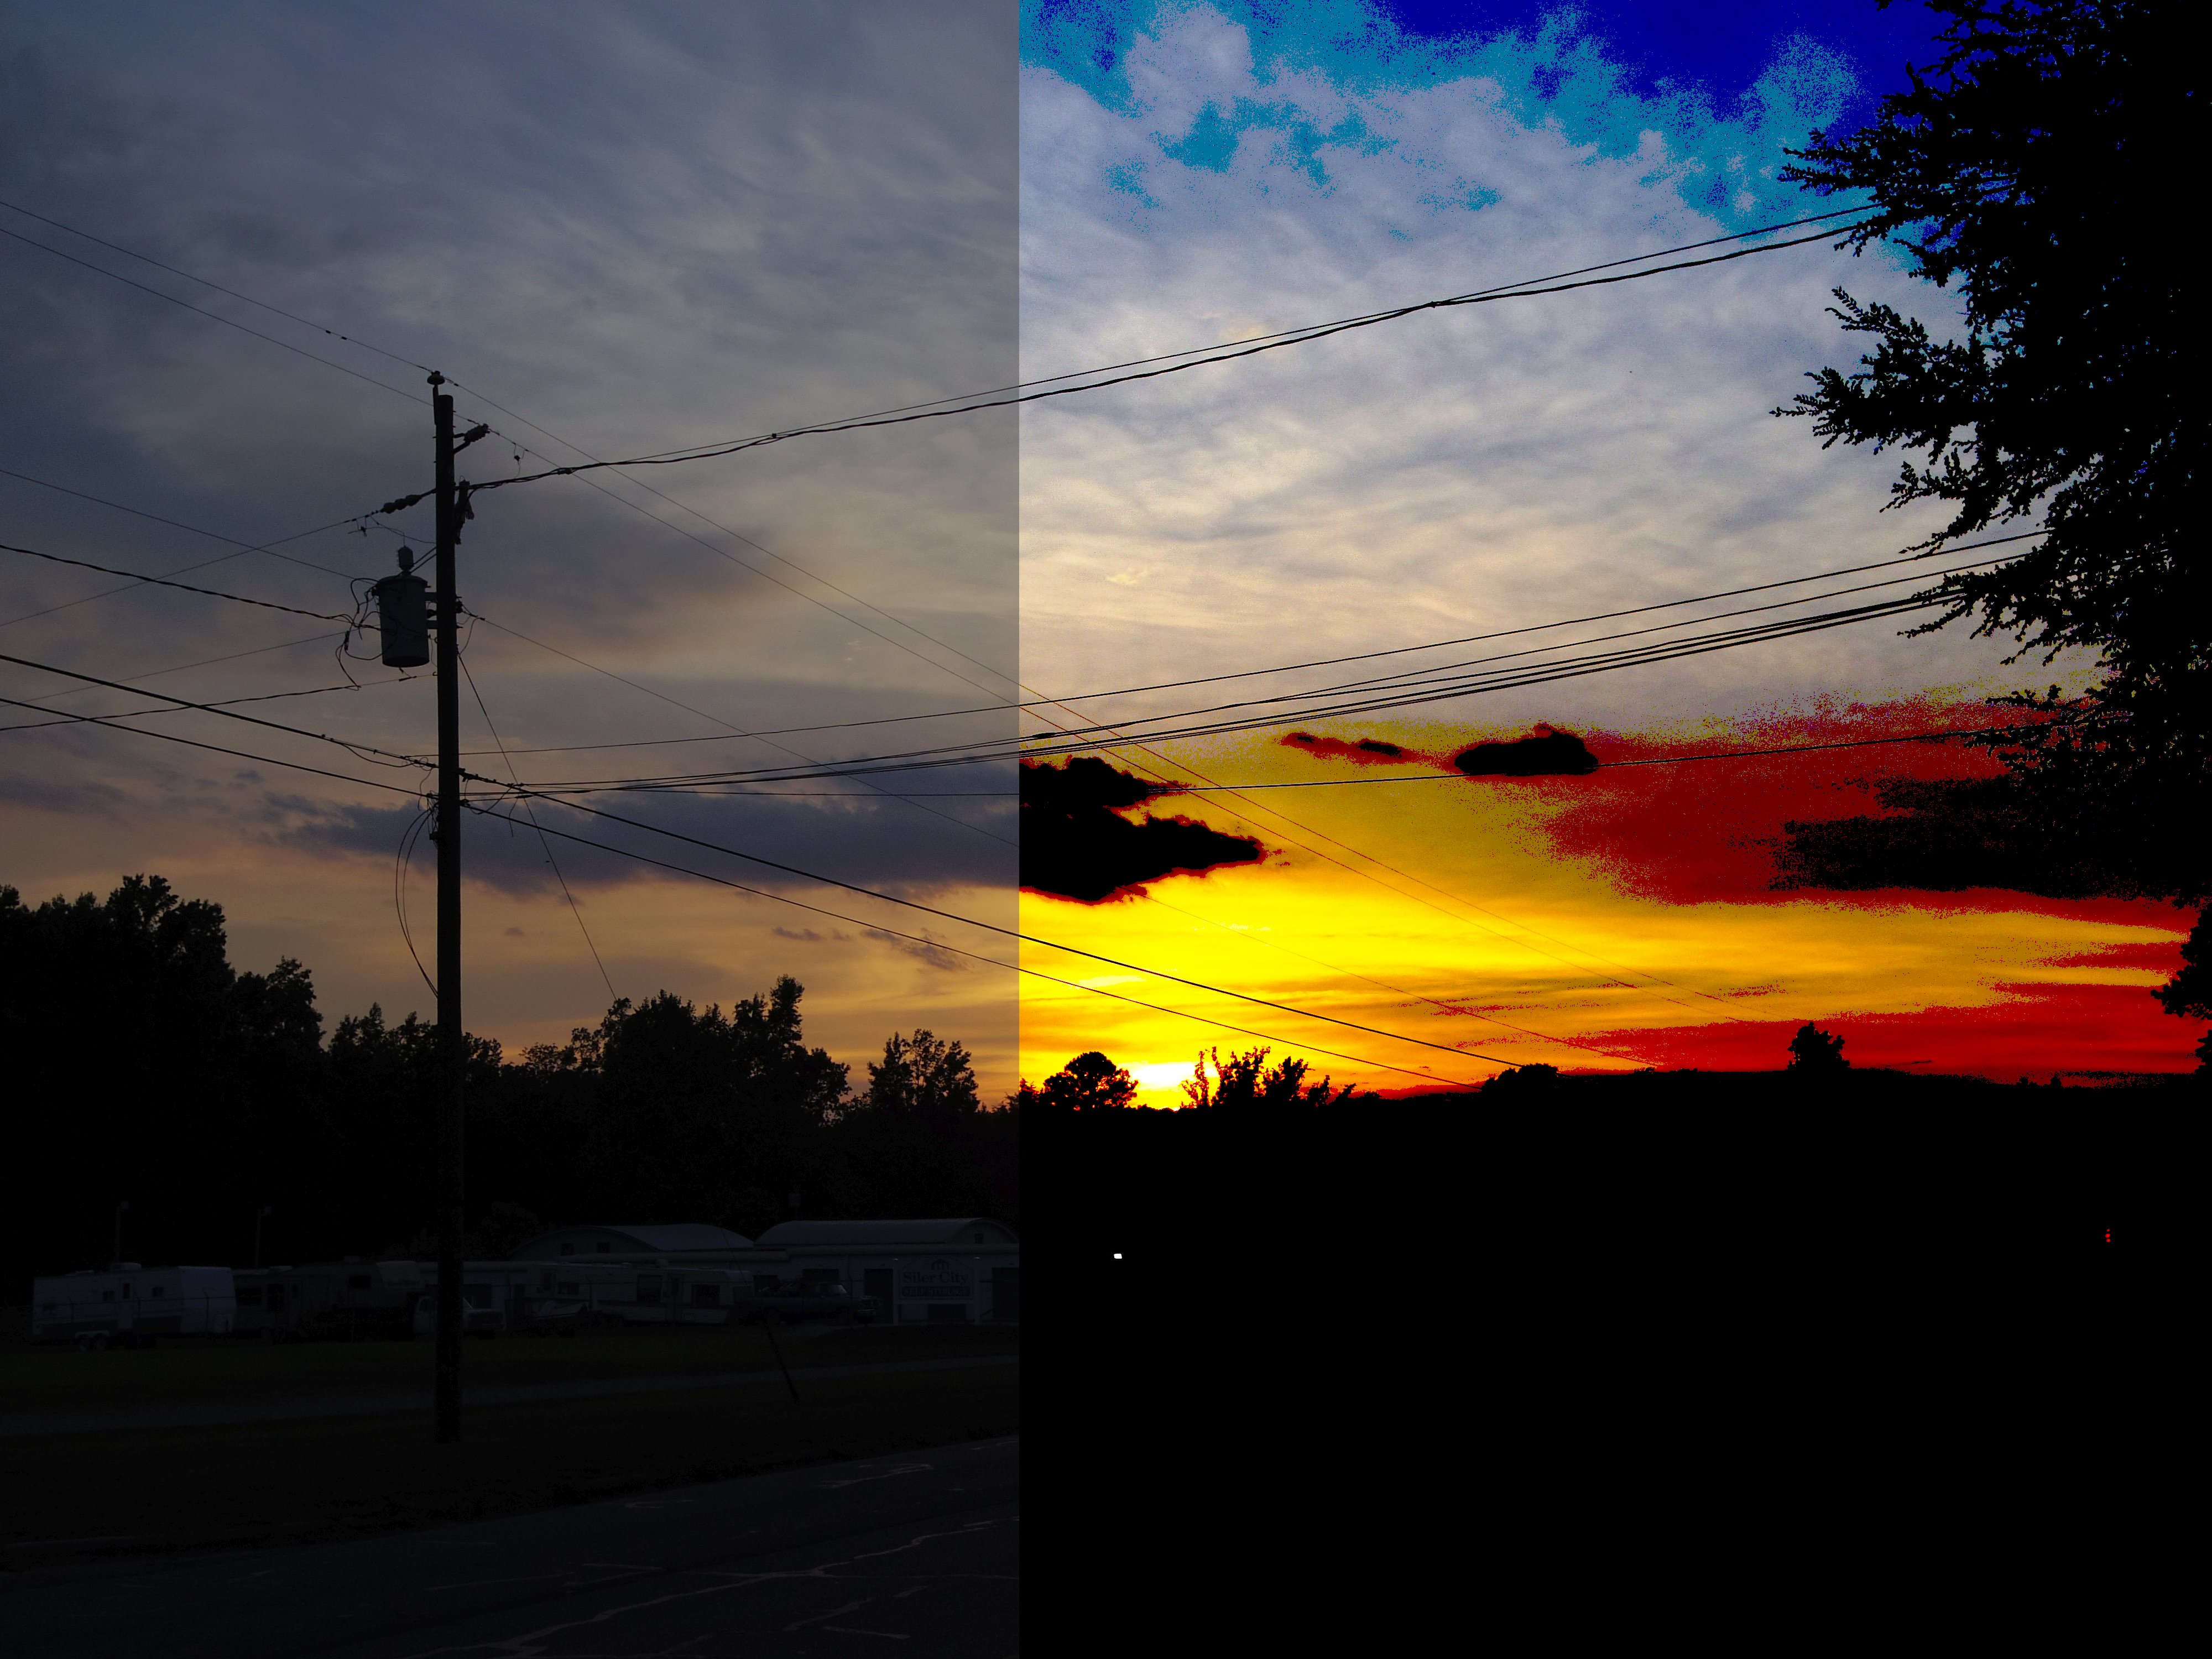 Split picture with normal sunset on the left and over-processed sunset on the right